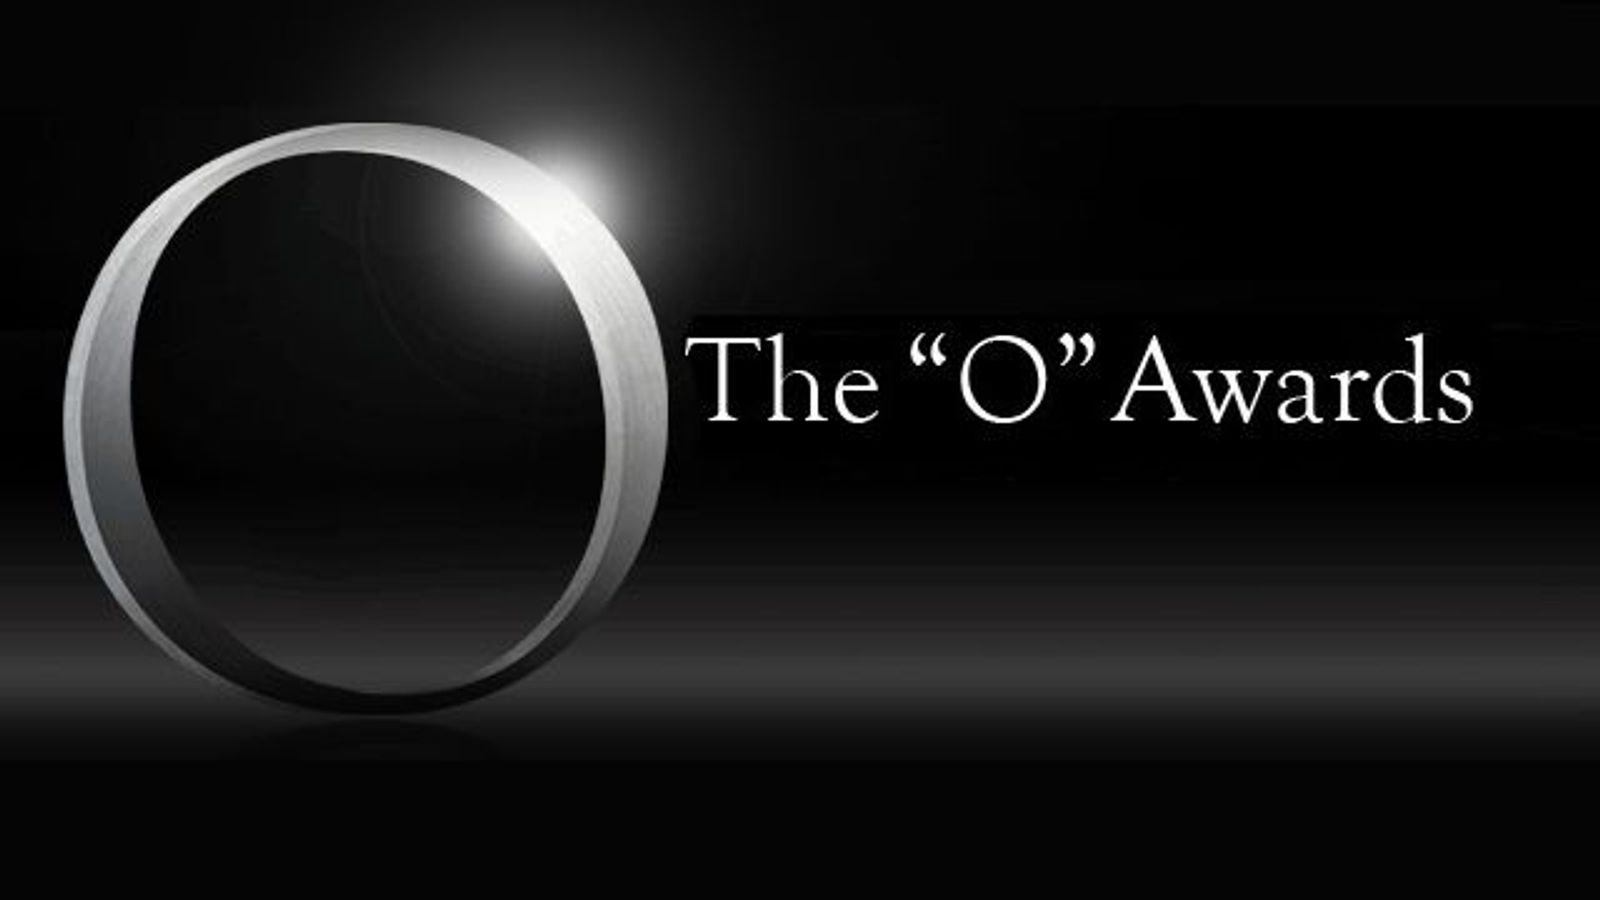 Pre-Noms Being Accepted for ‘O’ Awards